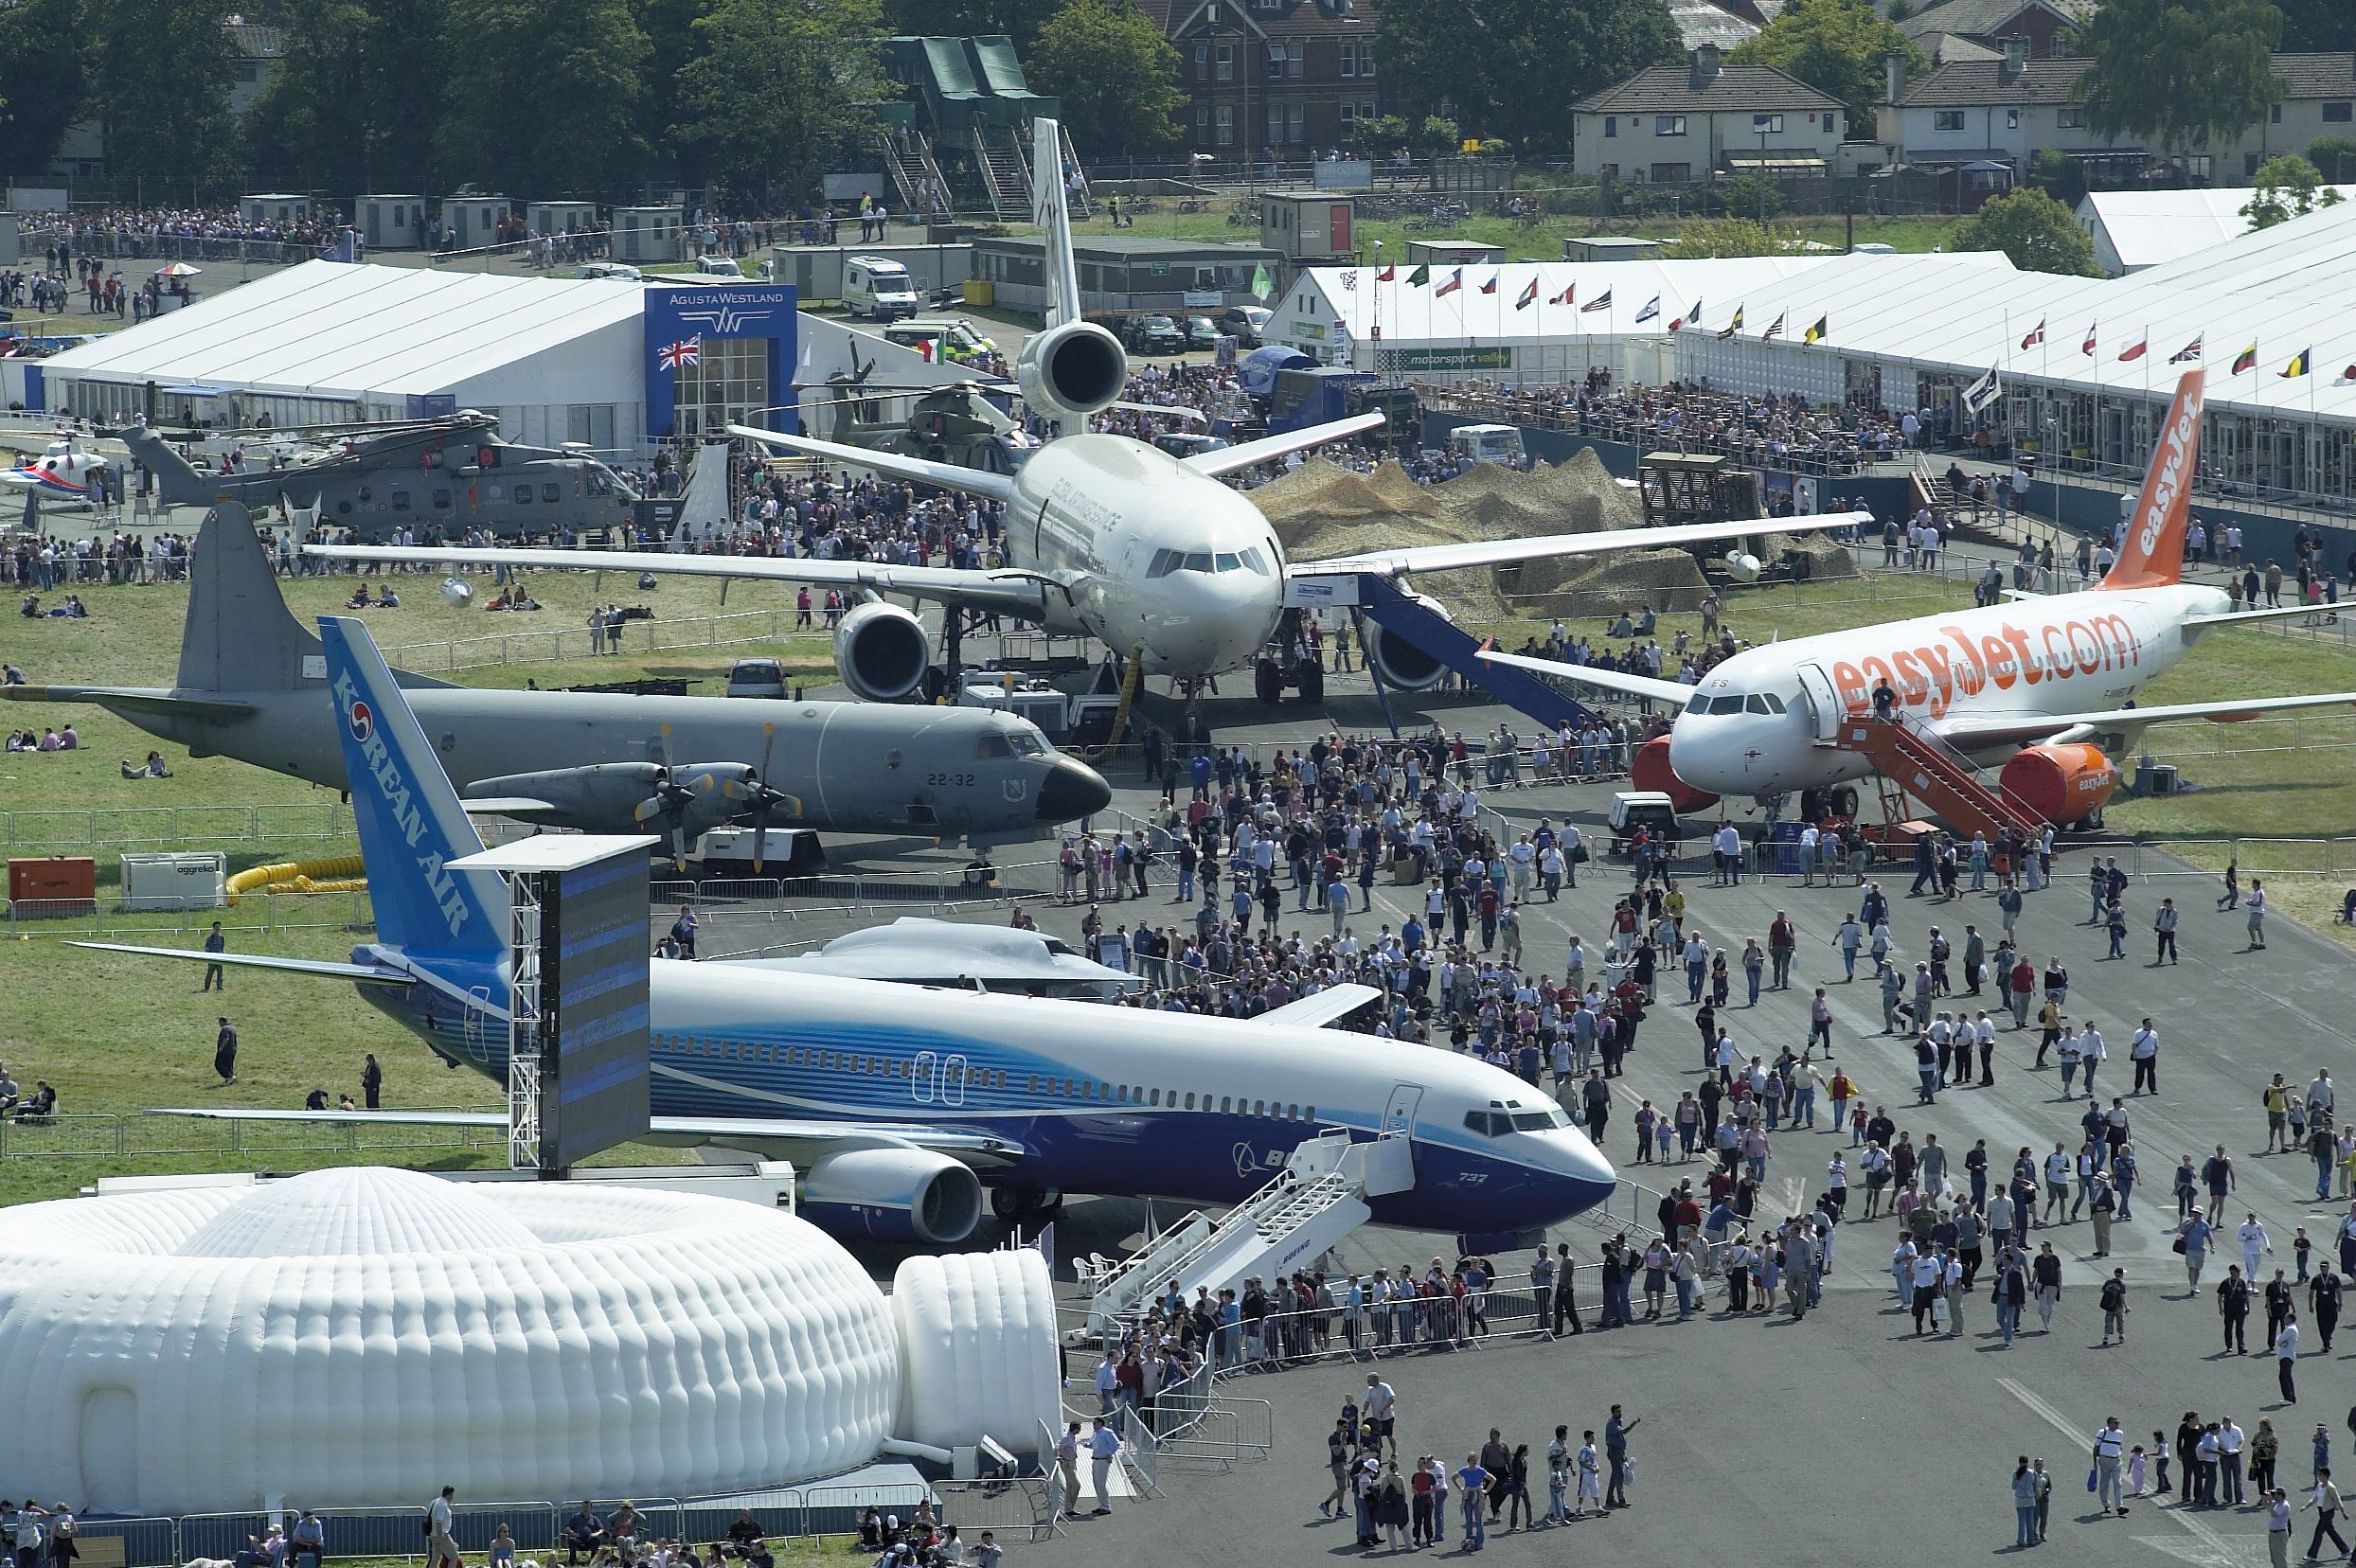 Get in the know about the Farnborough Airshow